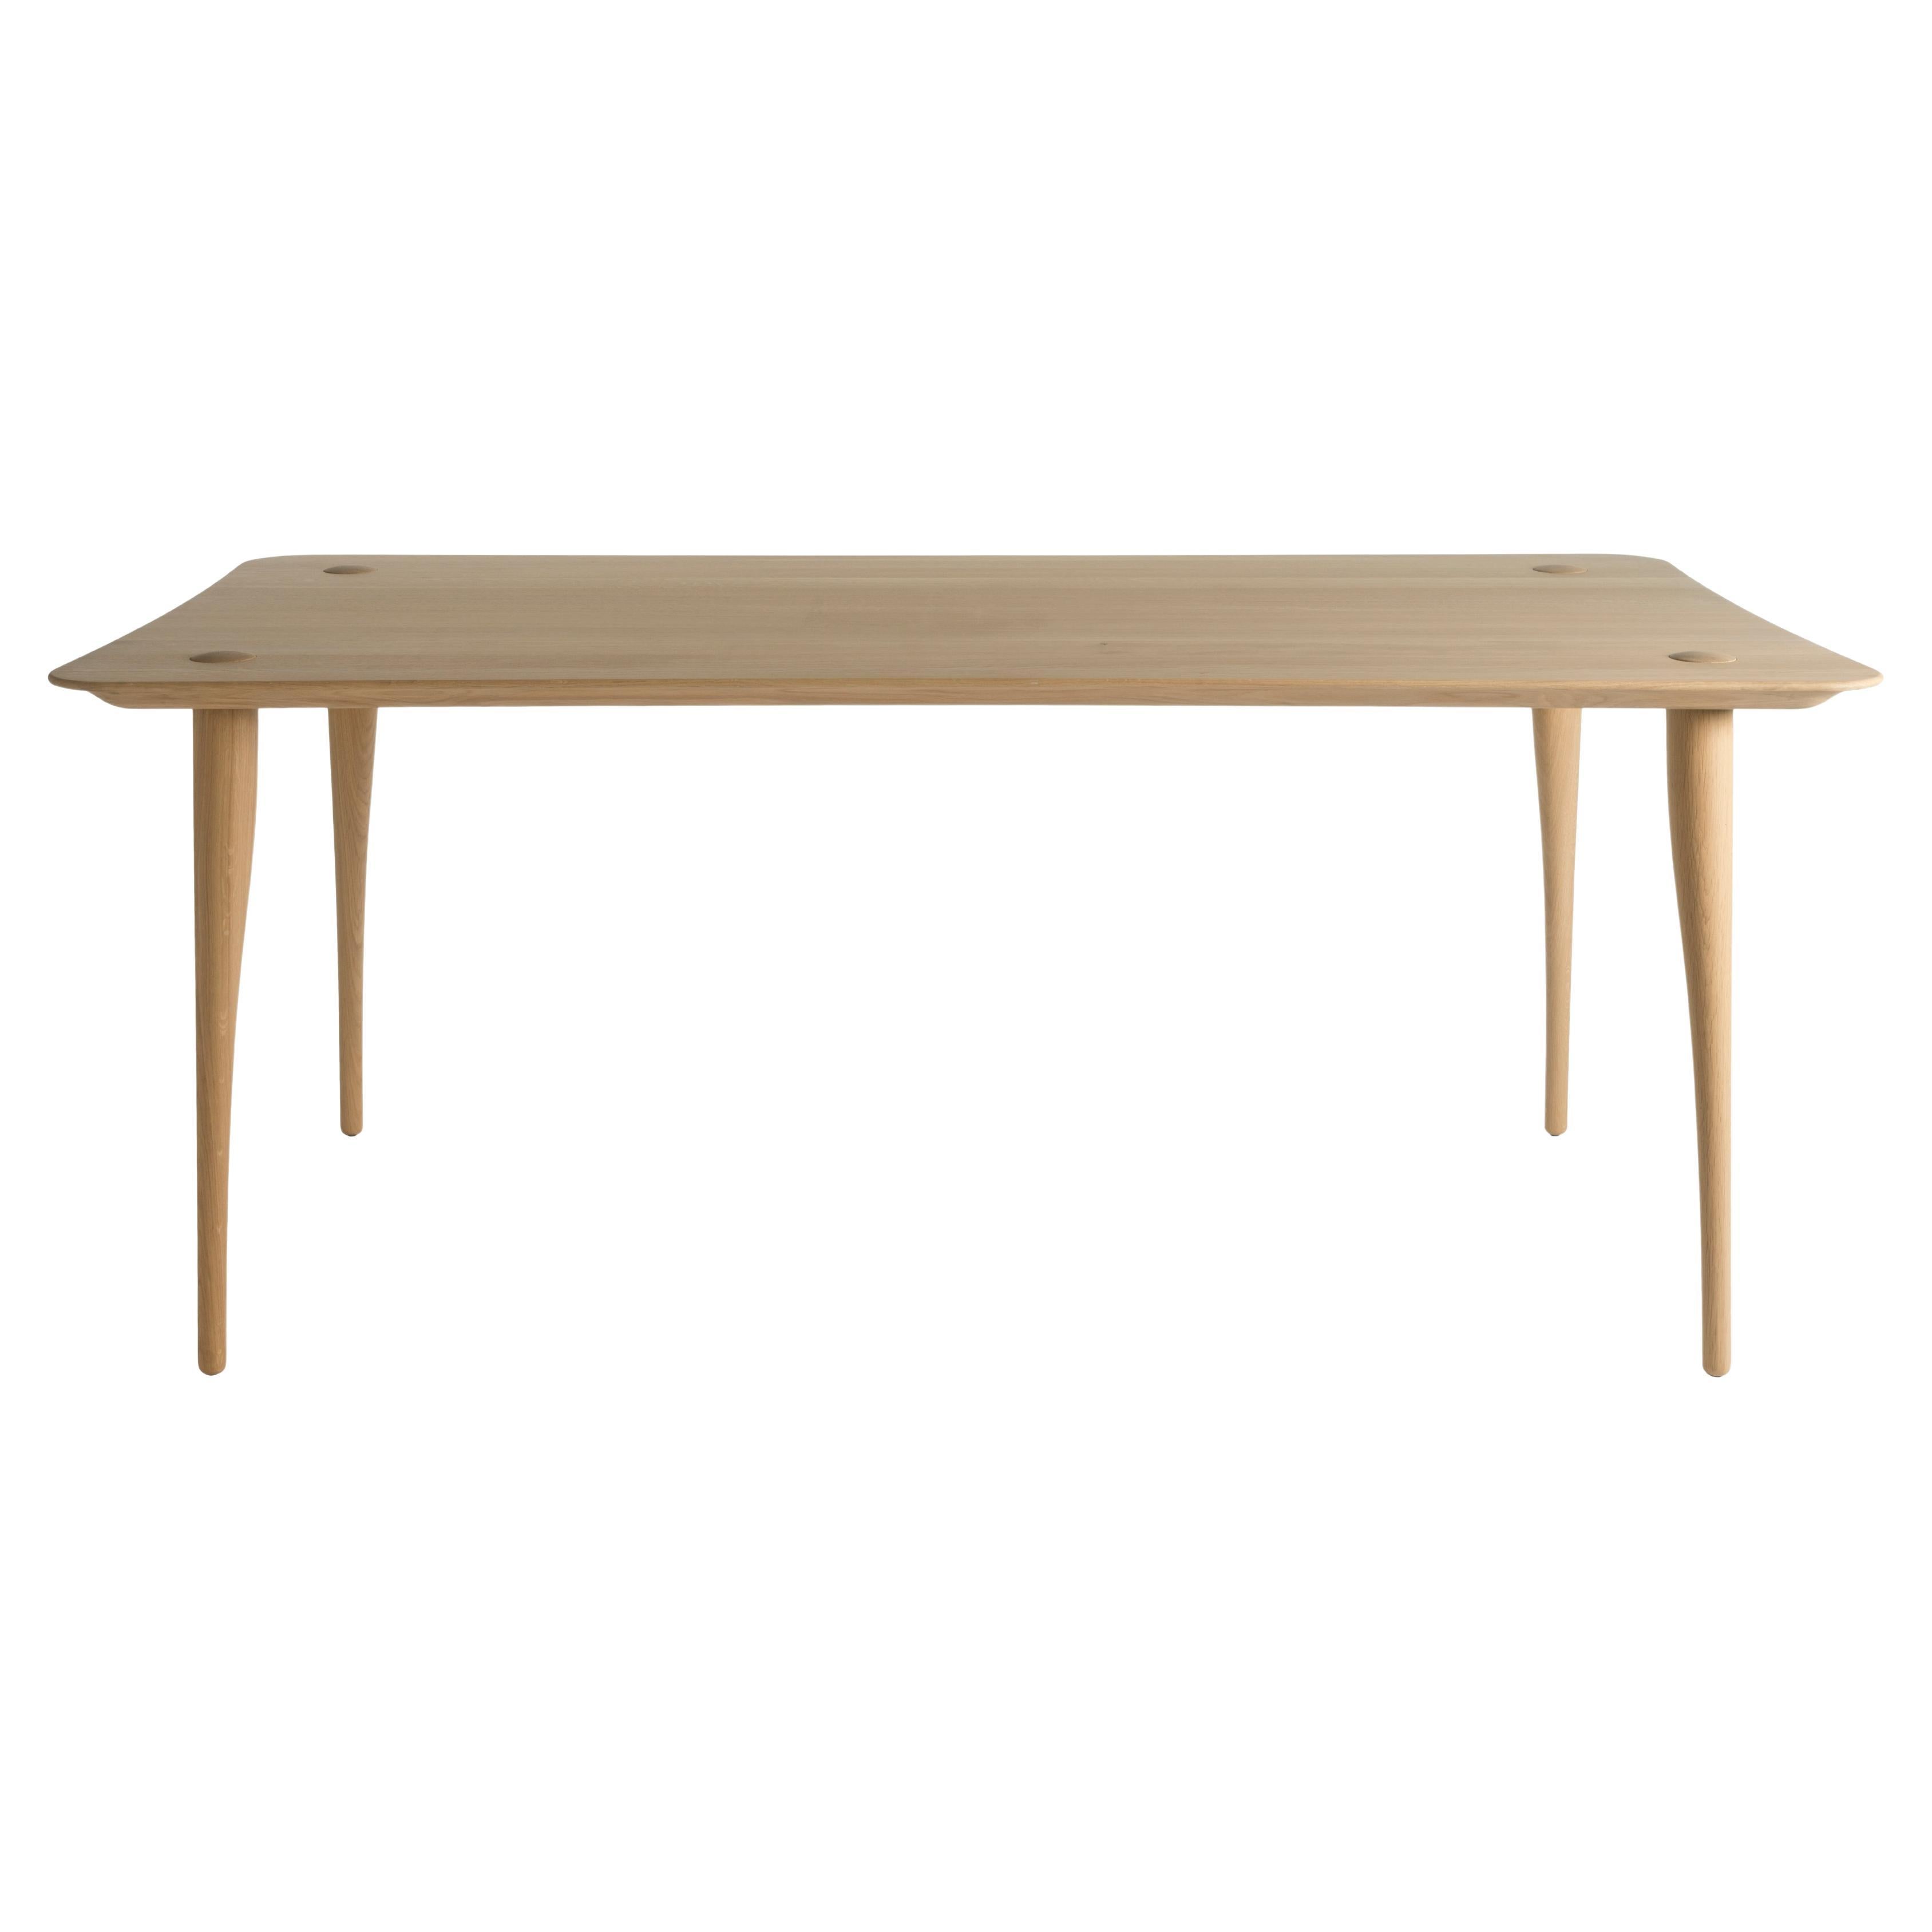 Revised Lewes - solid oak dining table - rectangle 240x95cm